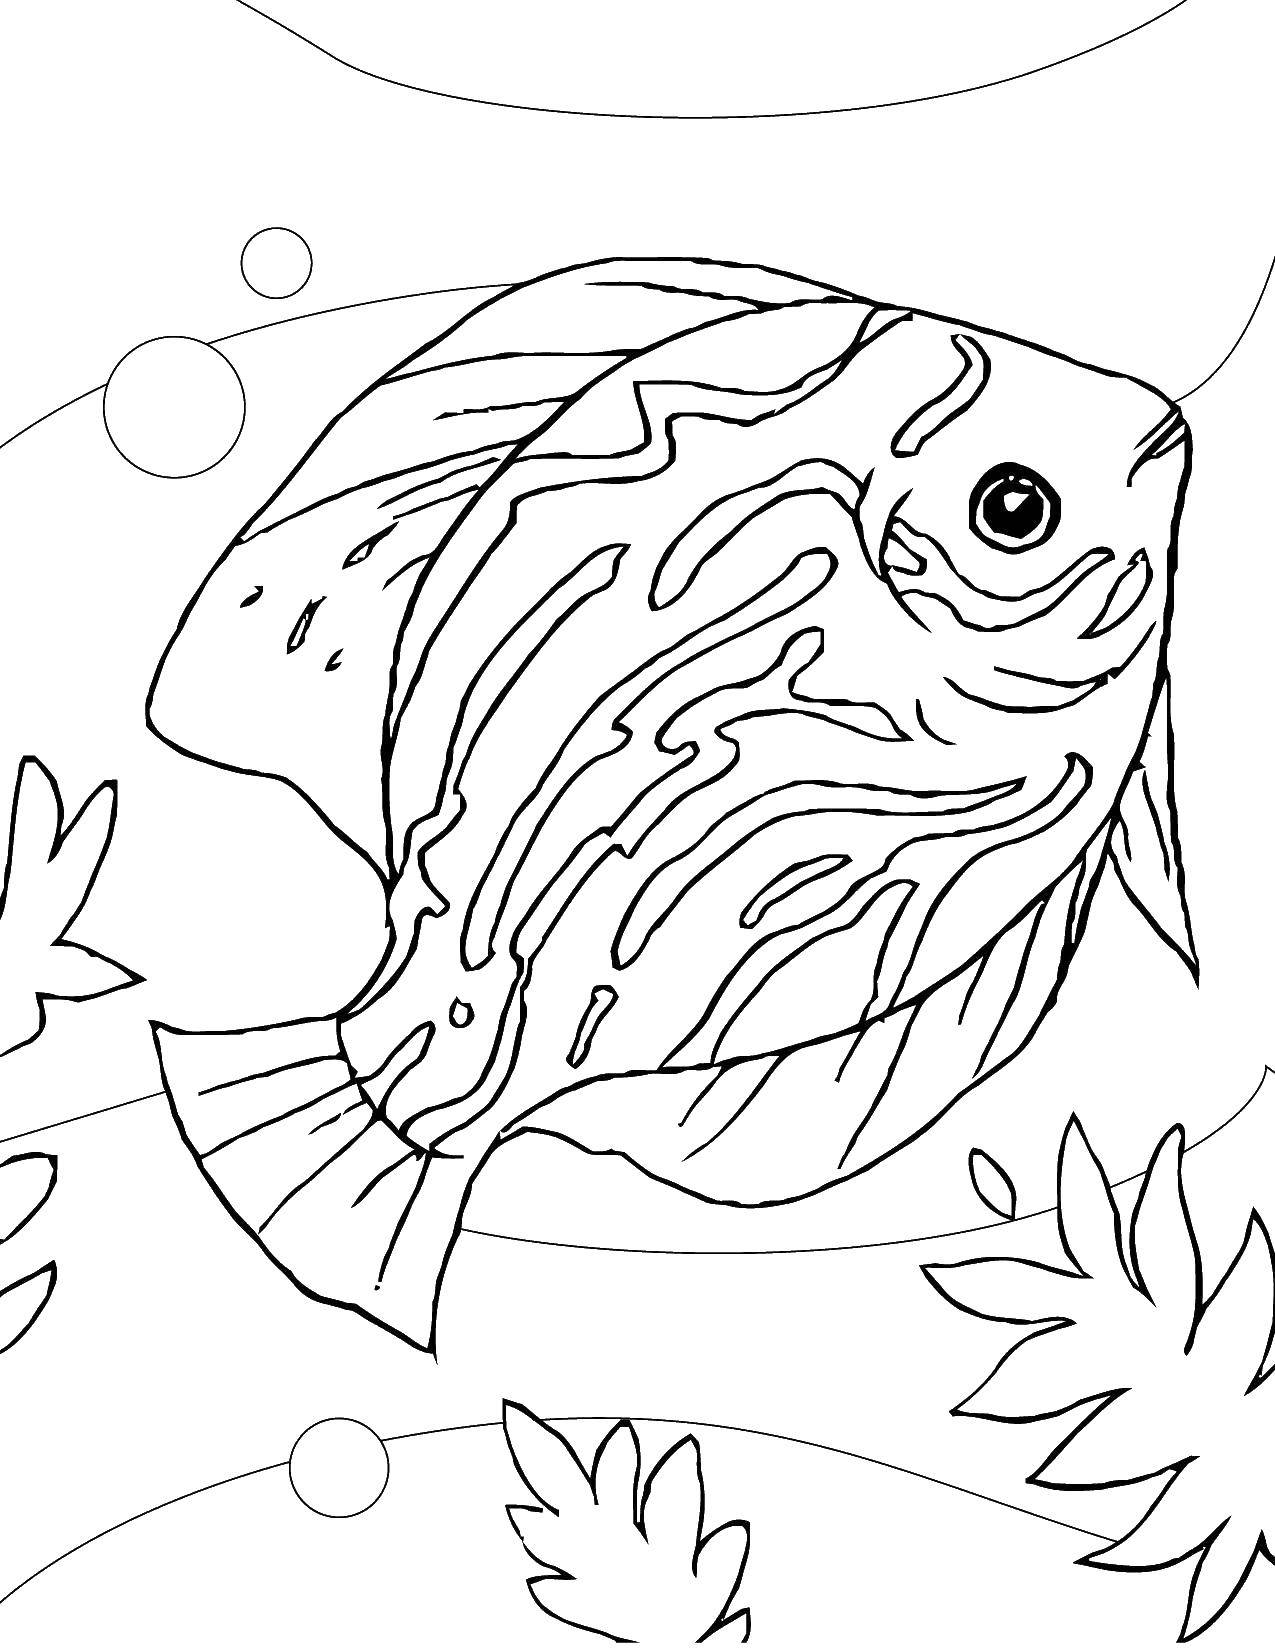 Coloring Fish. Category fish. Tags:  fish, fishes, water.